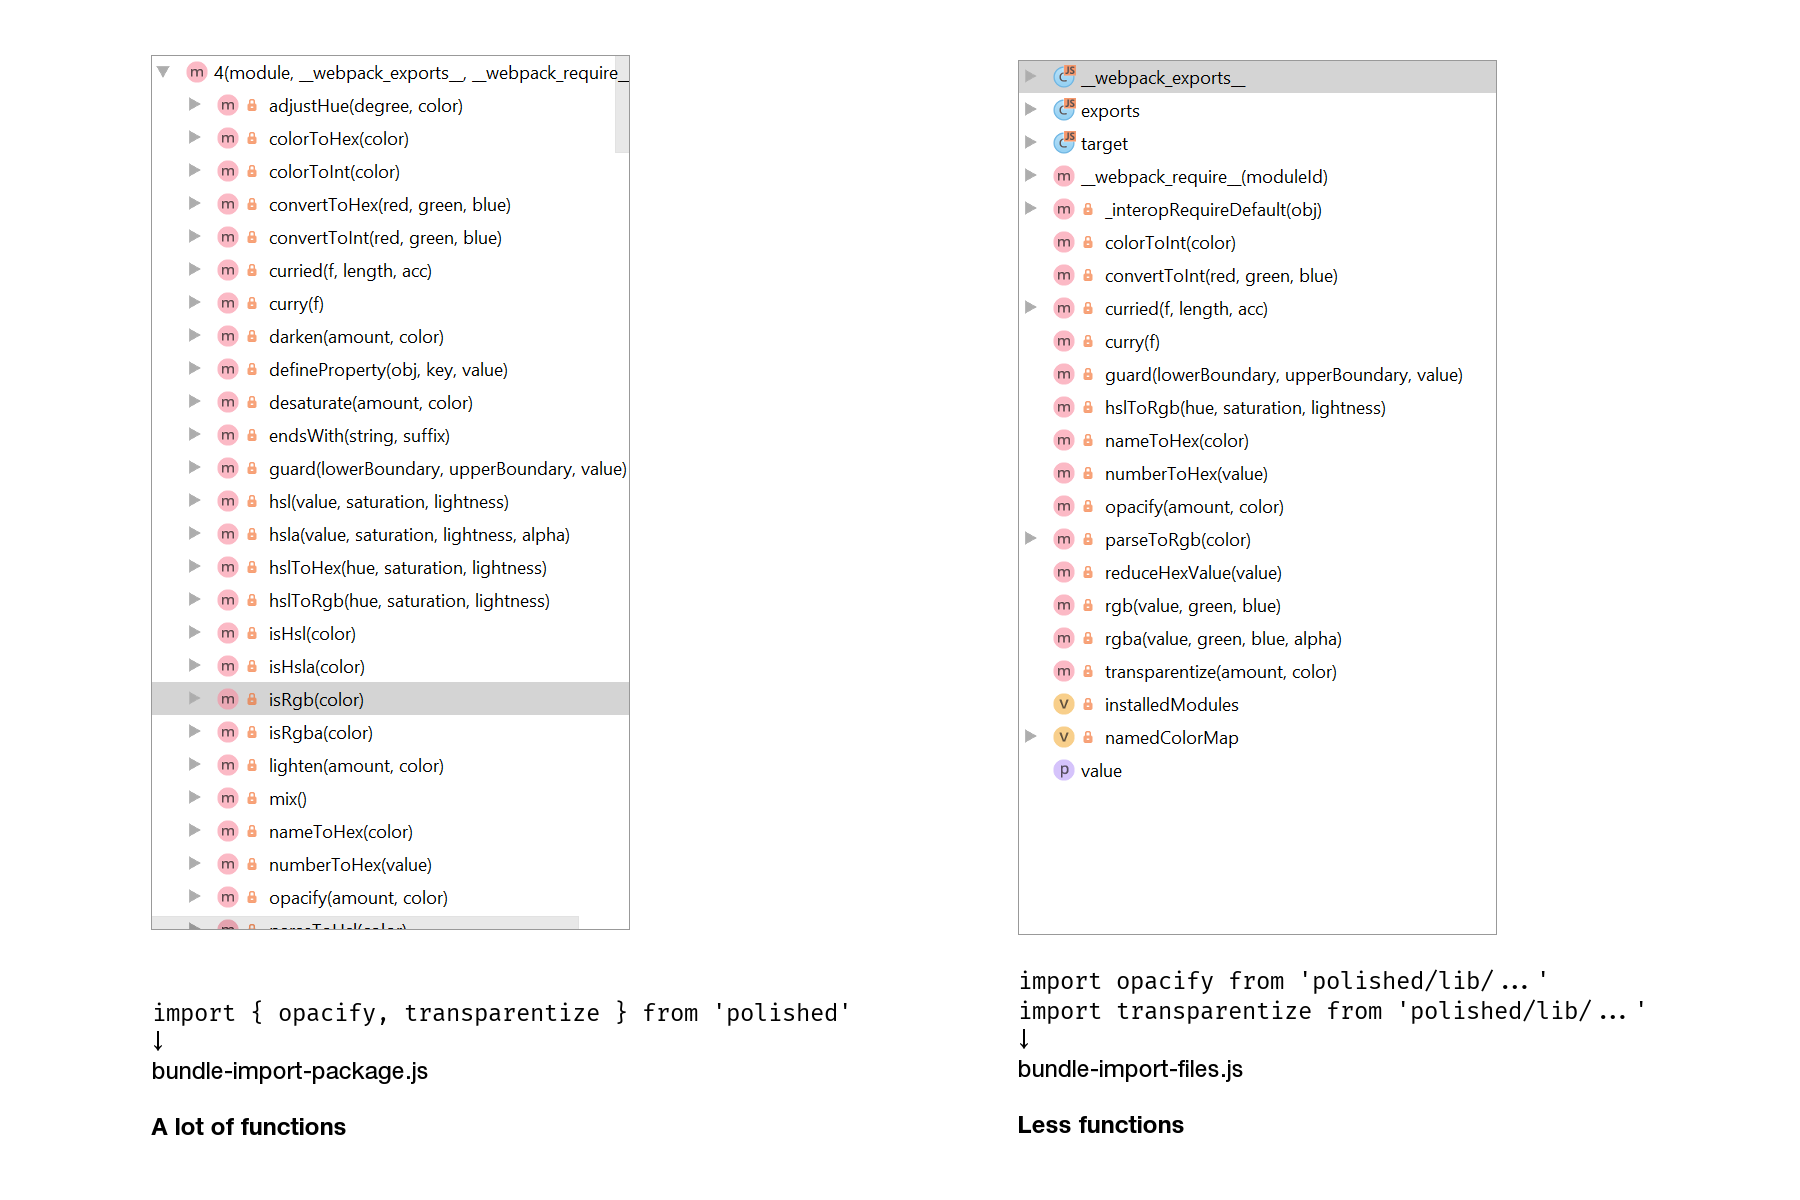 A comparison between the content of two files. The left file is bundle-import-package.js, it has a lot of functions. The right file is bundle-import-files.js, it has much less functions.